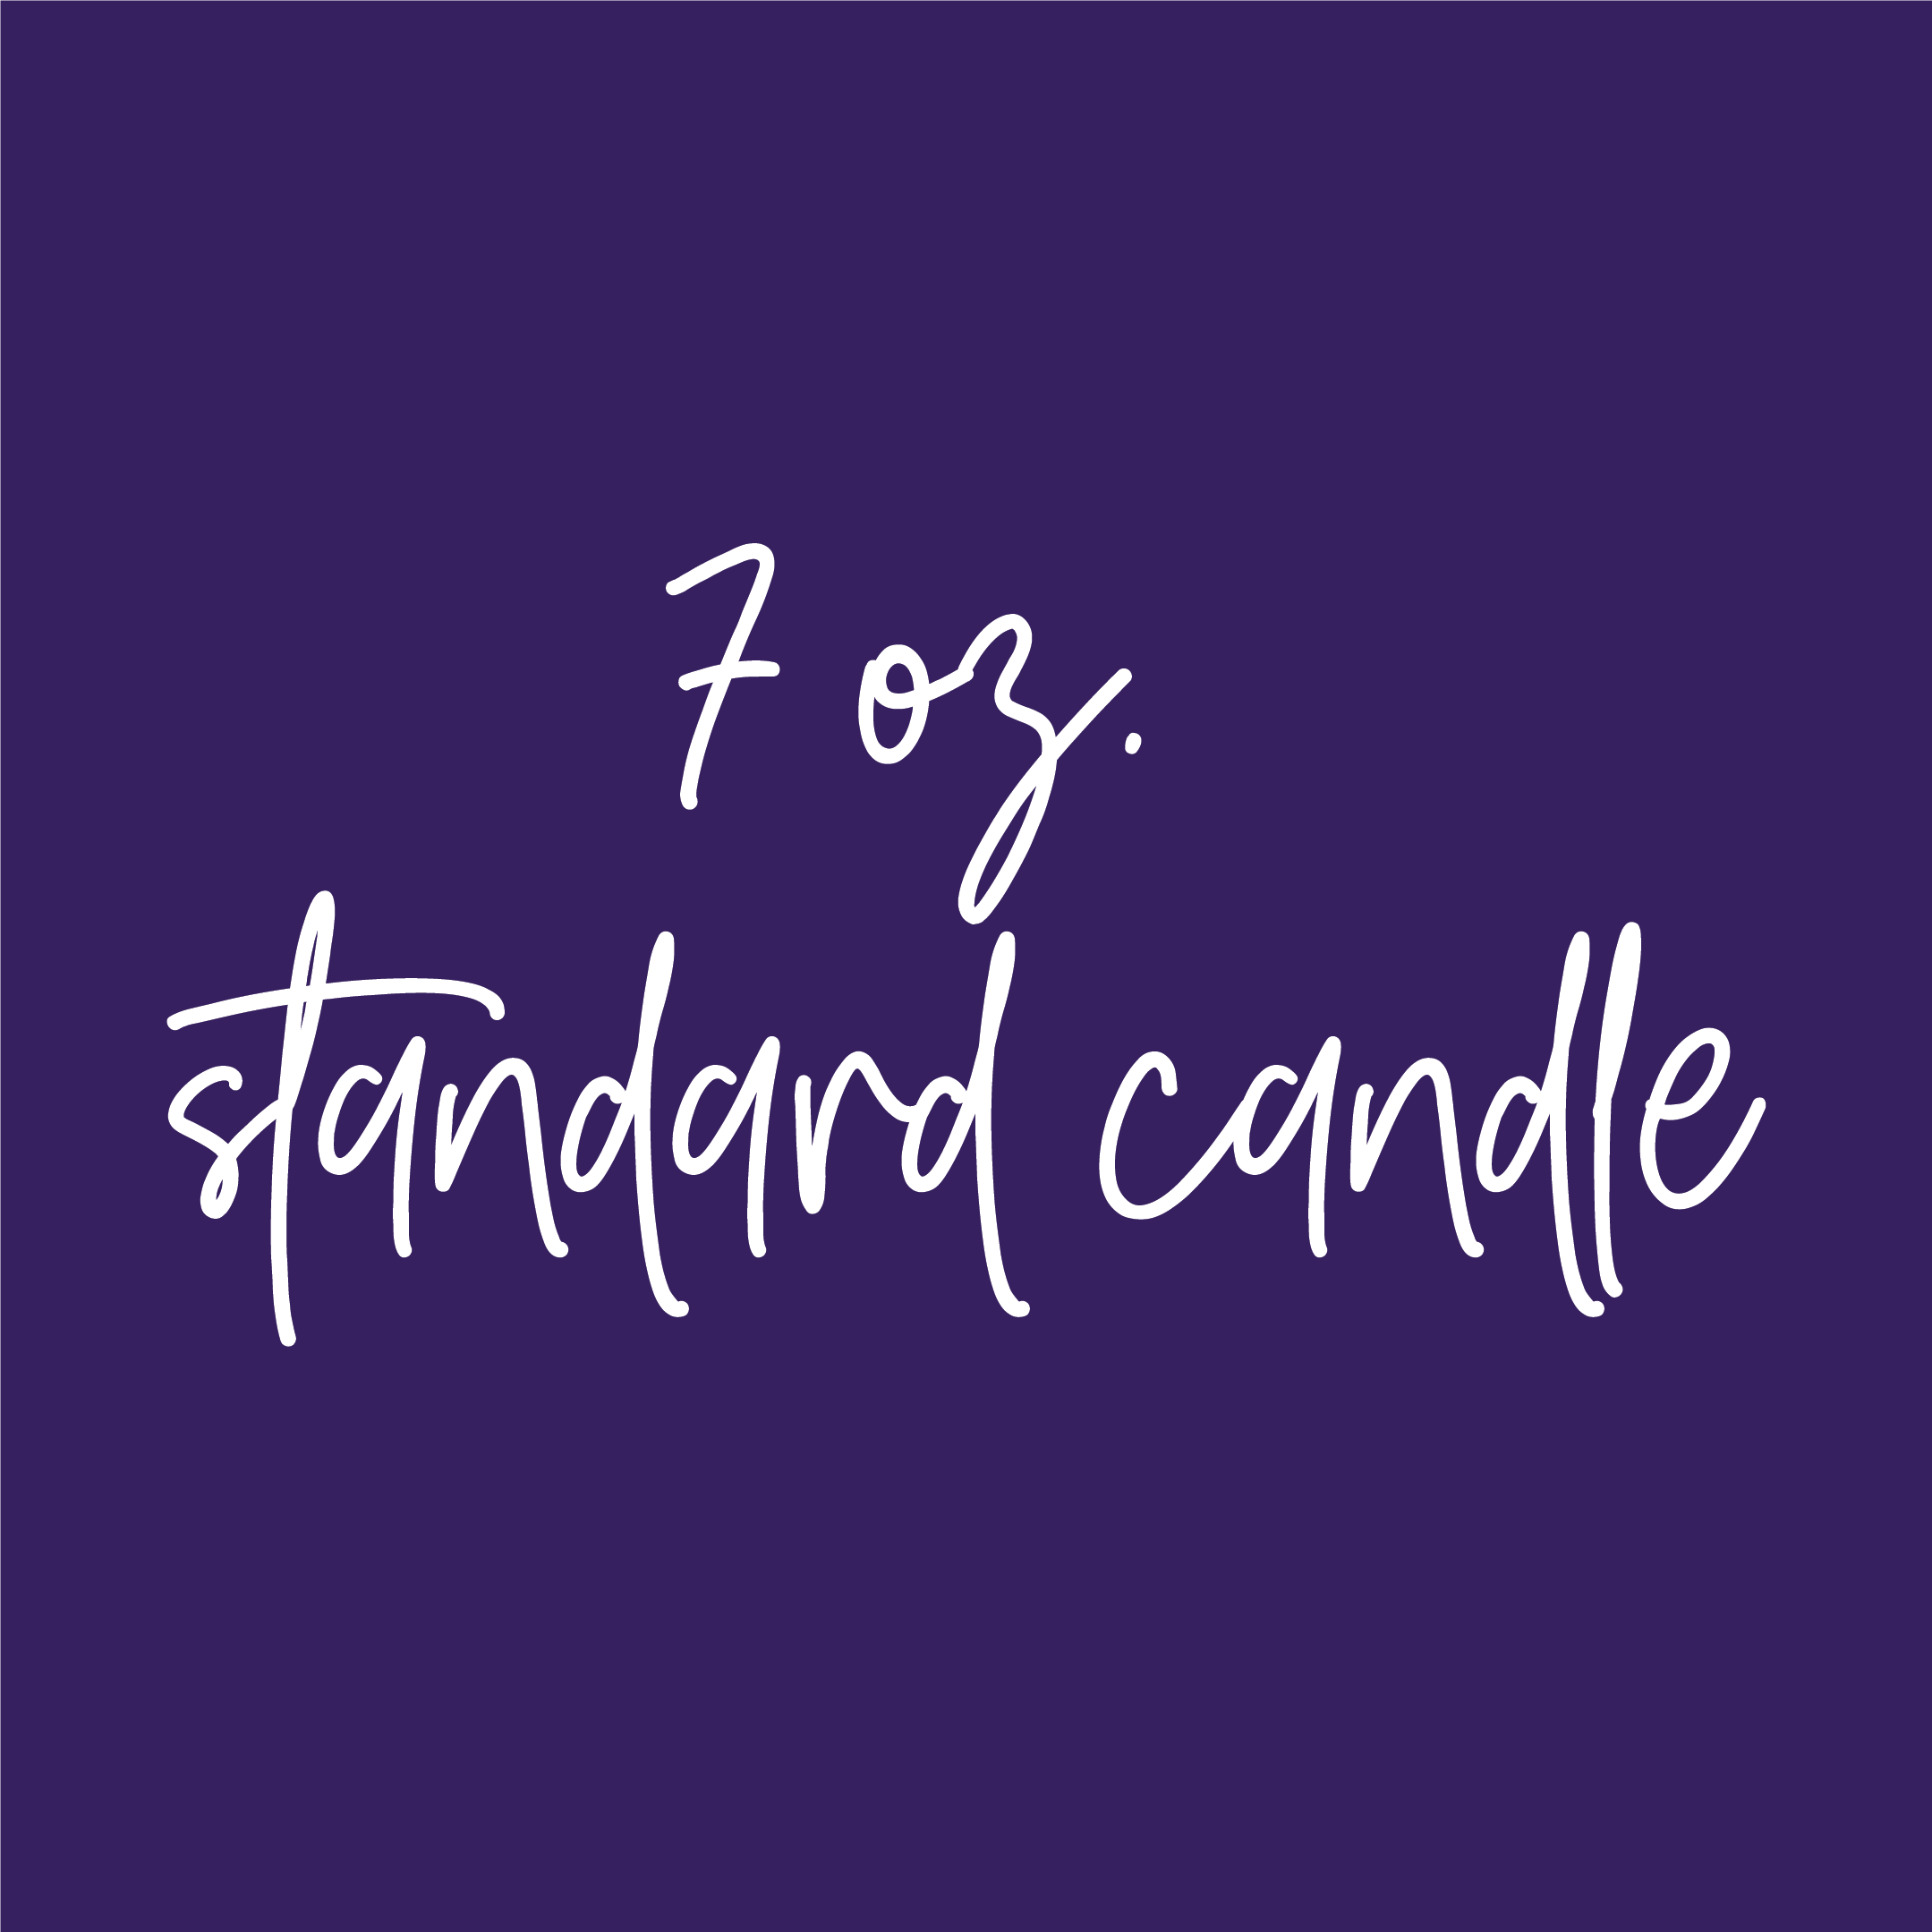 Re-order 7 oz. standard candle